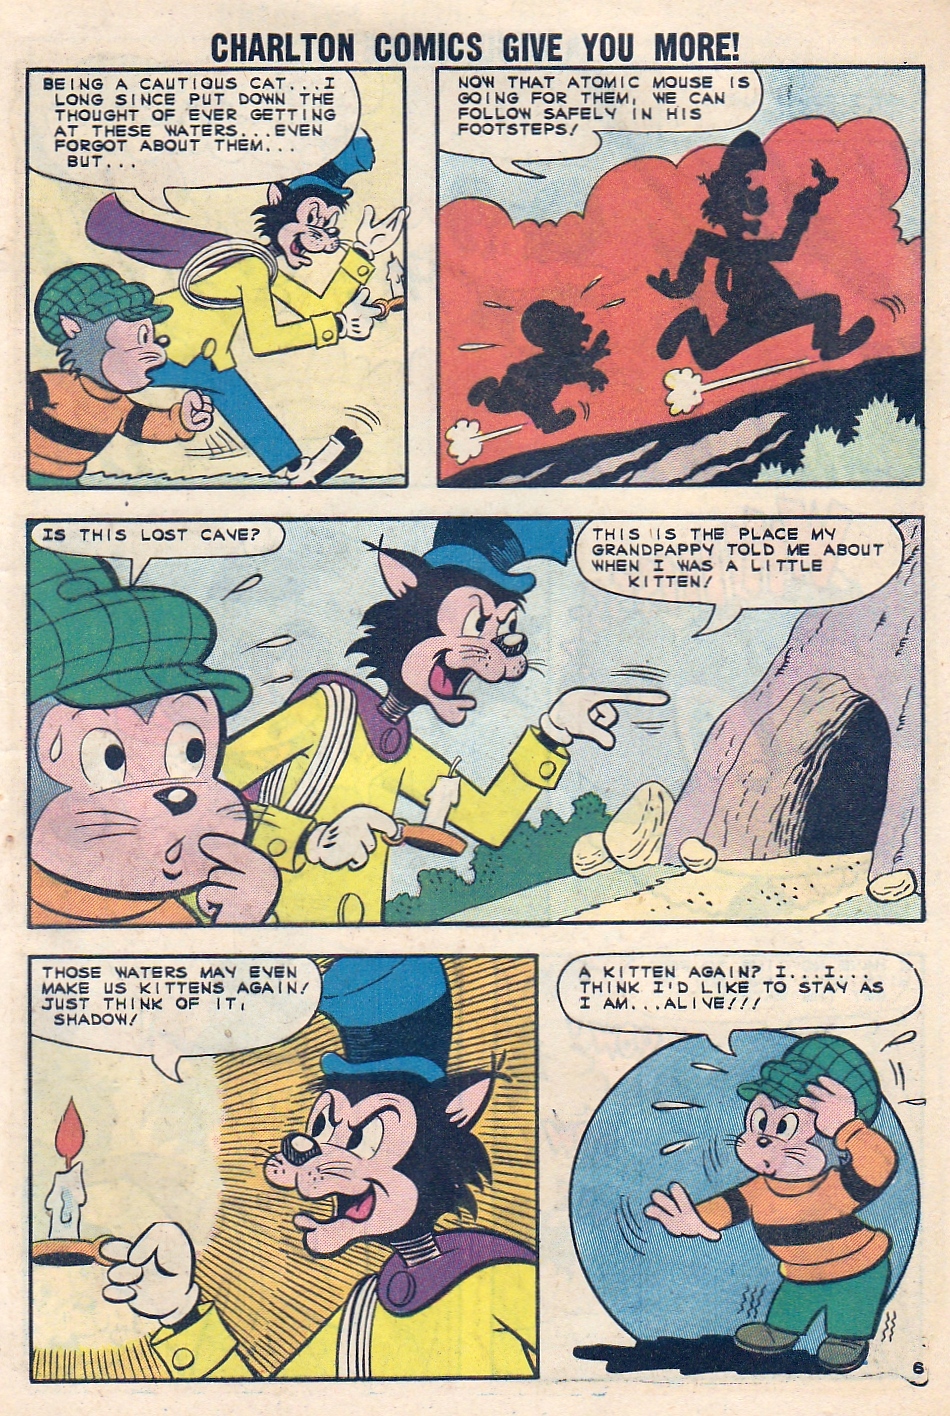 Read online Atomic Mouse comic -  Issue #48 - 8